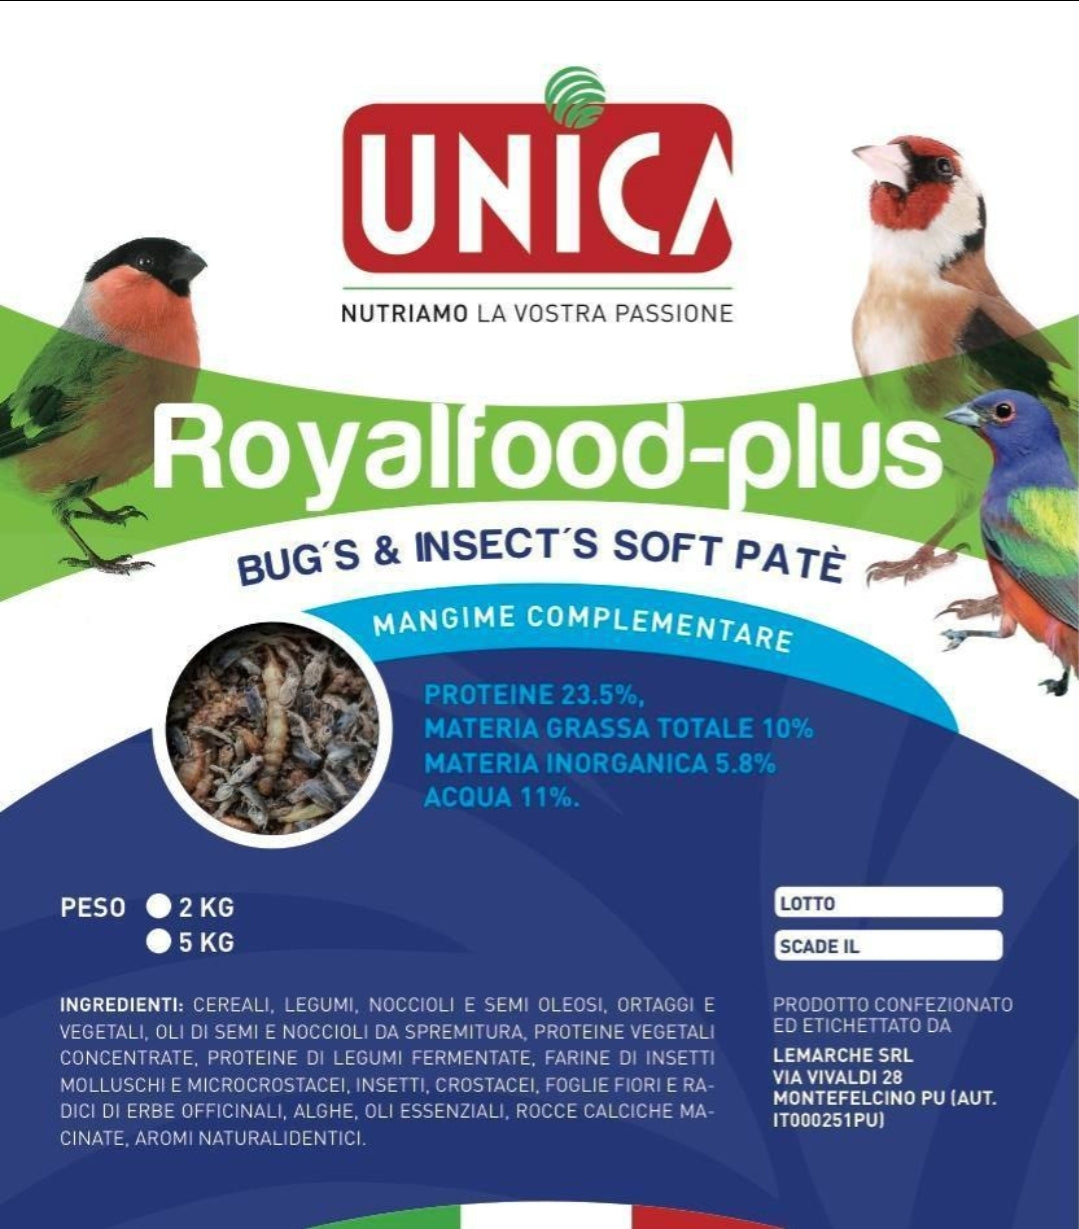 RoyalFood Plus ( Bug's & Insect's Soft Patee ) 2kg - Unica